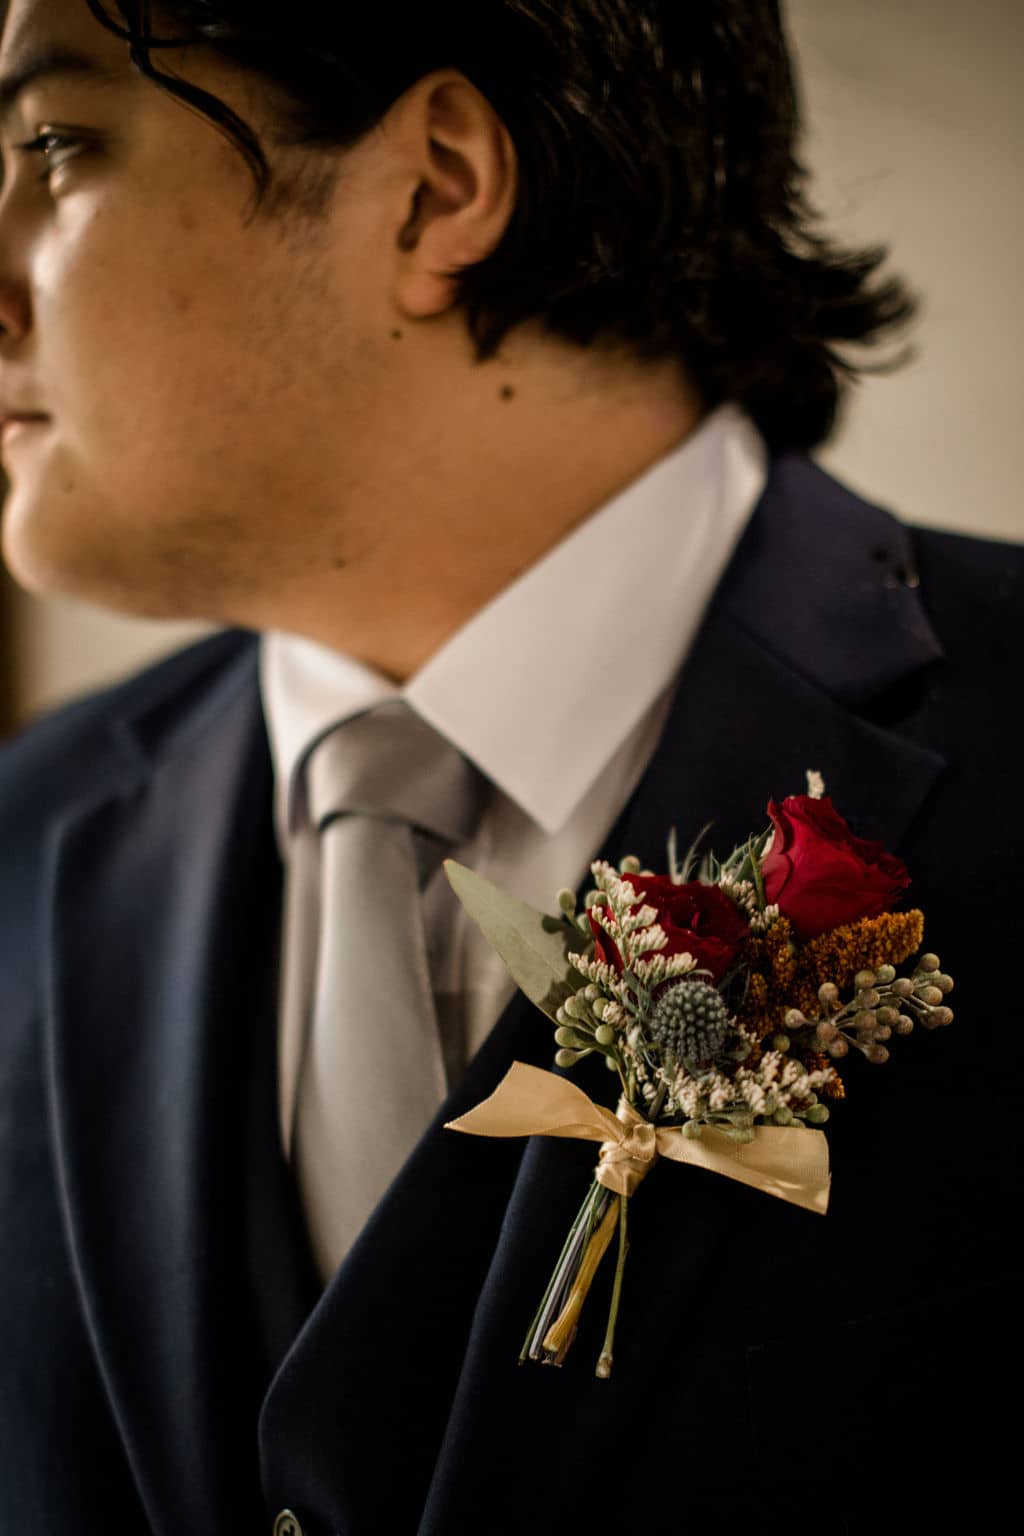 the groom is facing away from the camera while focusing on his floral boutonniere designed by texas wedding florist Urban Rubbish